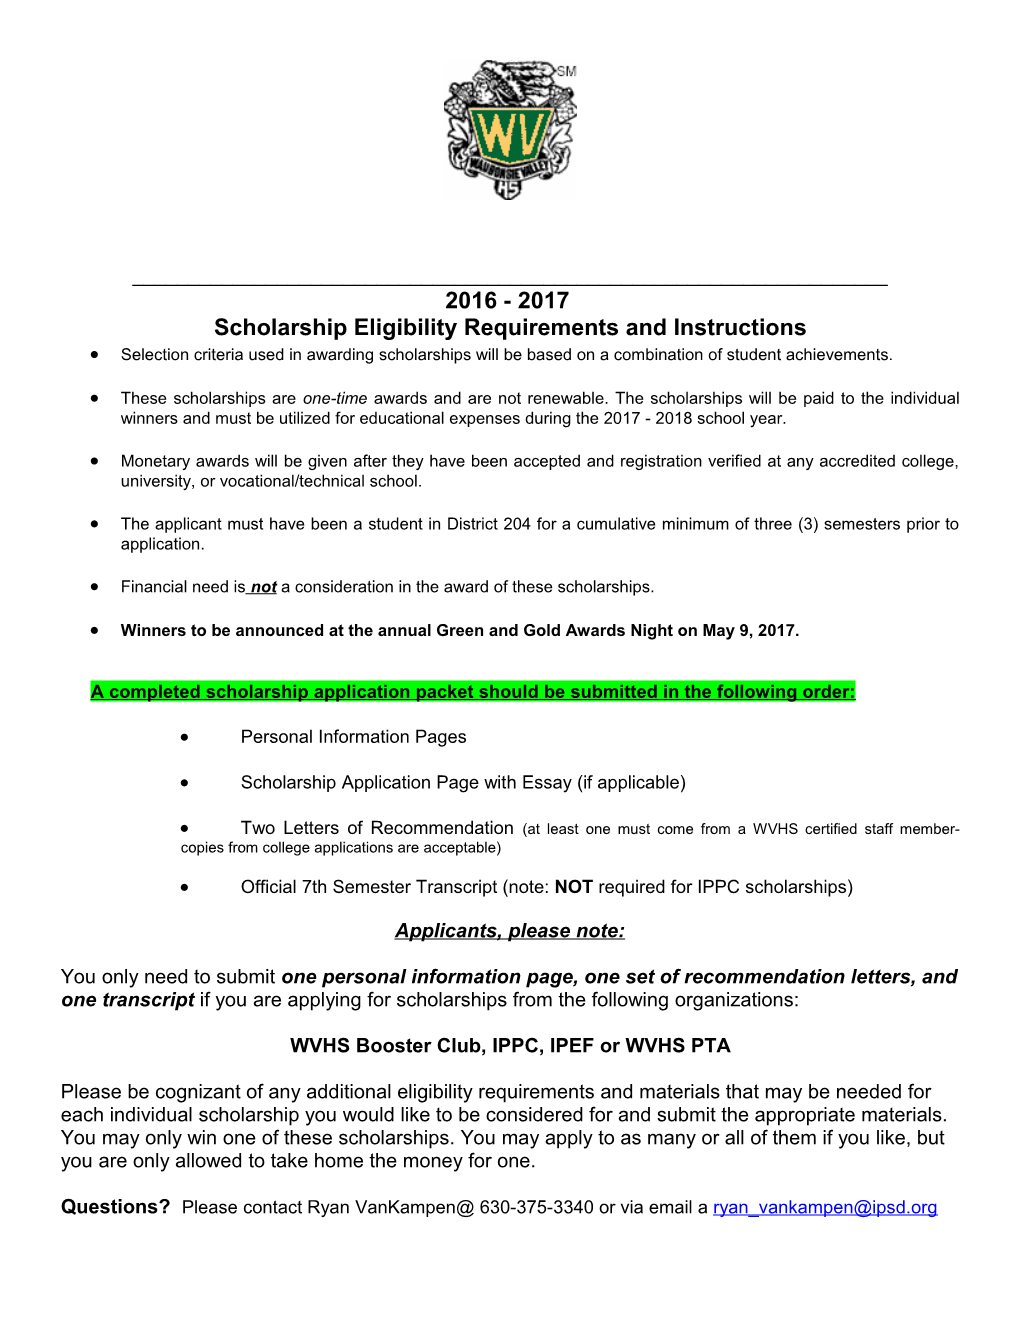 Scholarship Eligibility Requirements and Instructions